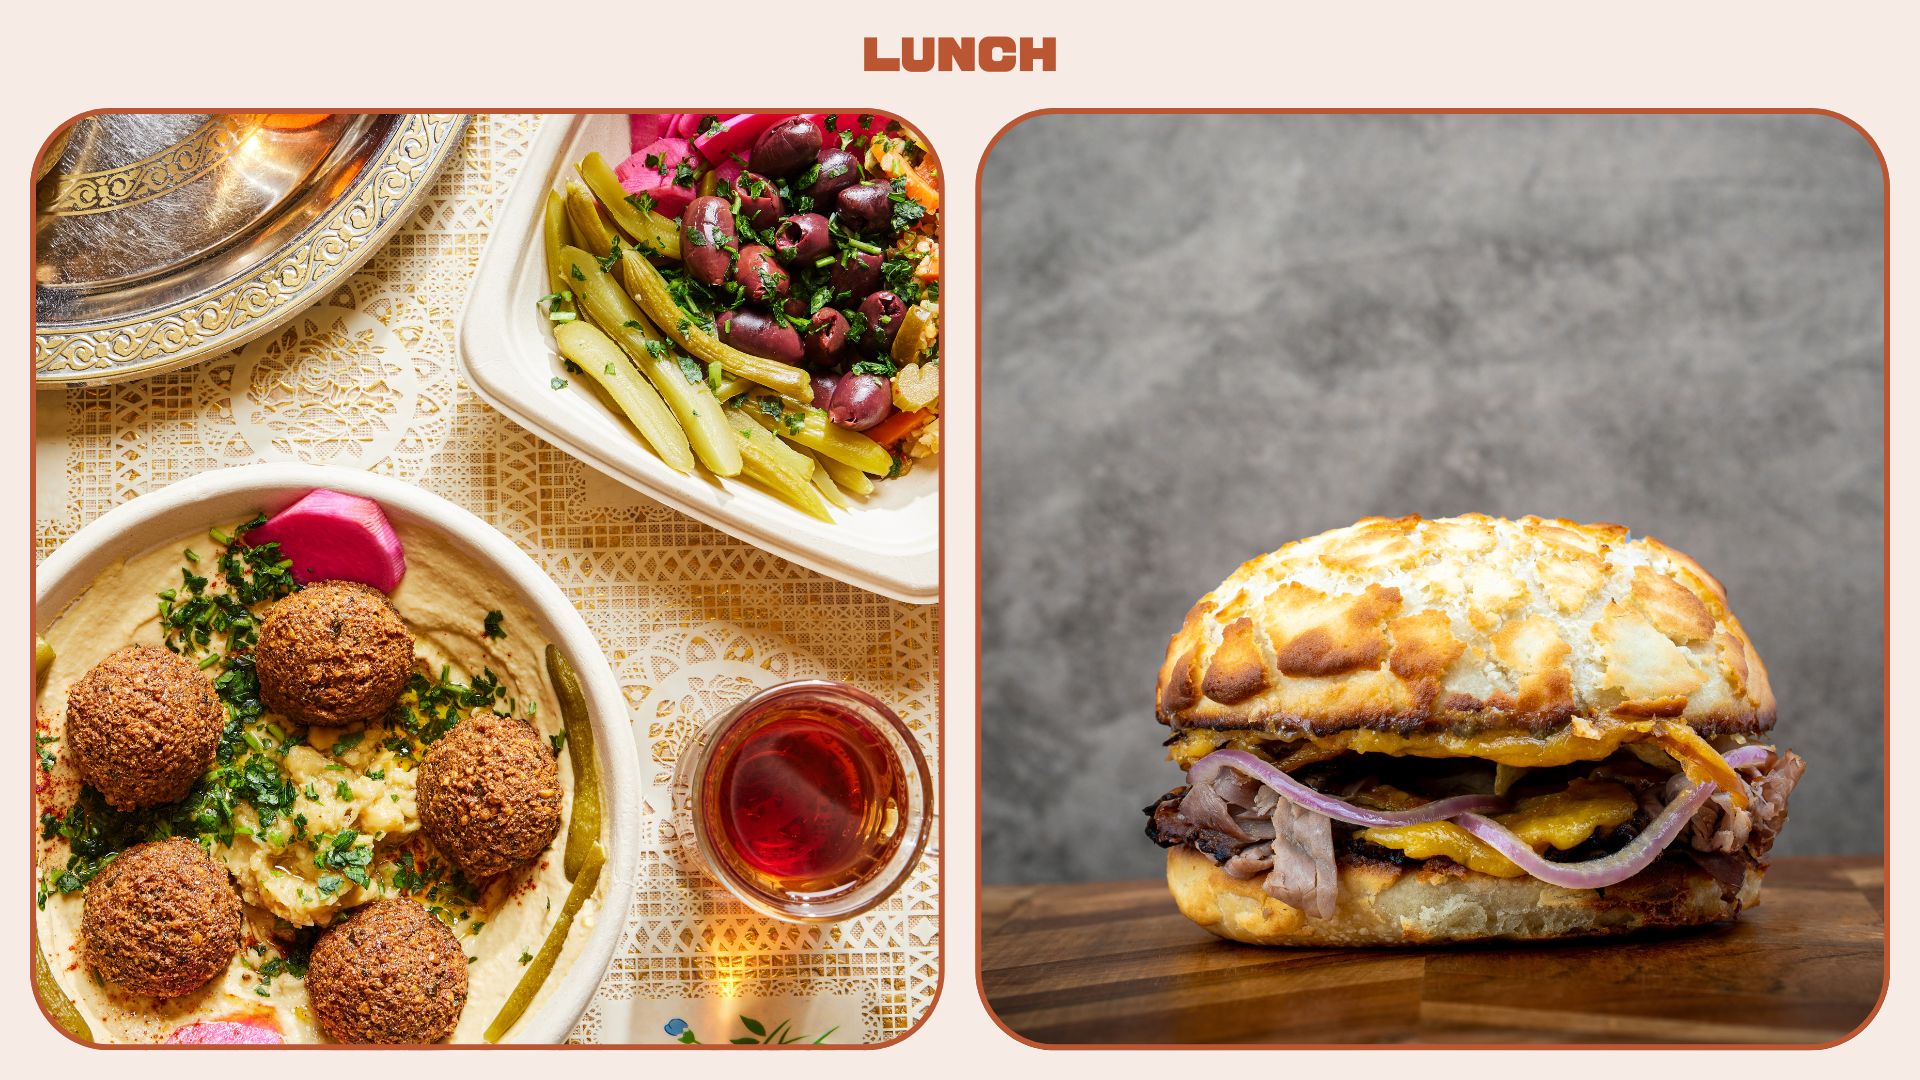 L: Mezze plate. R: Meat sandwich with melted cheese